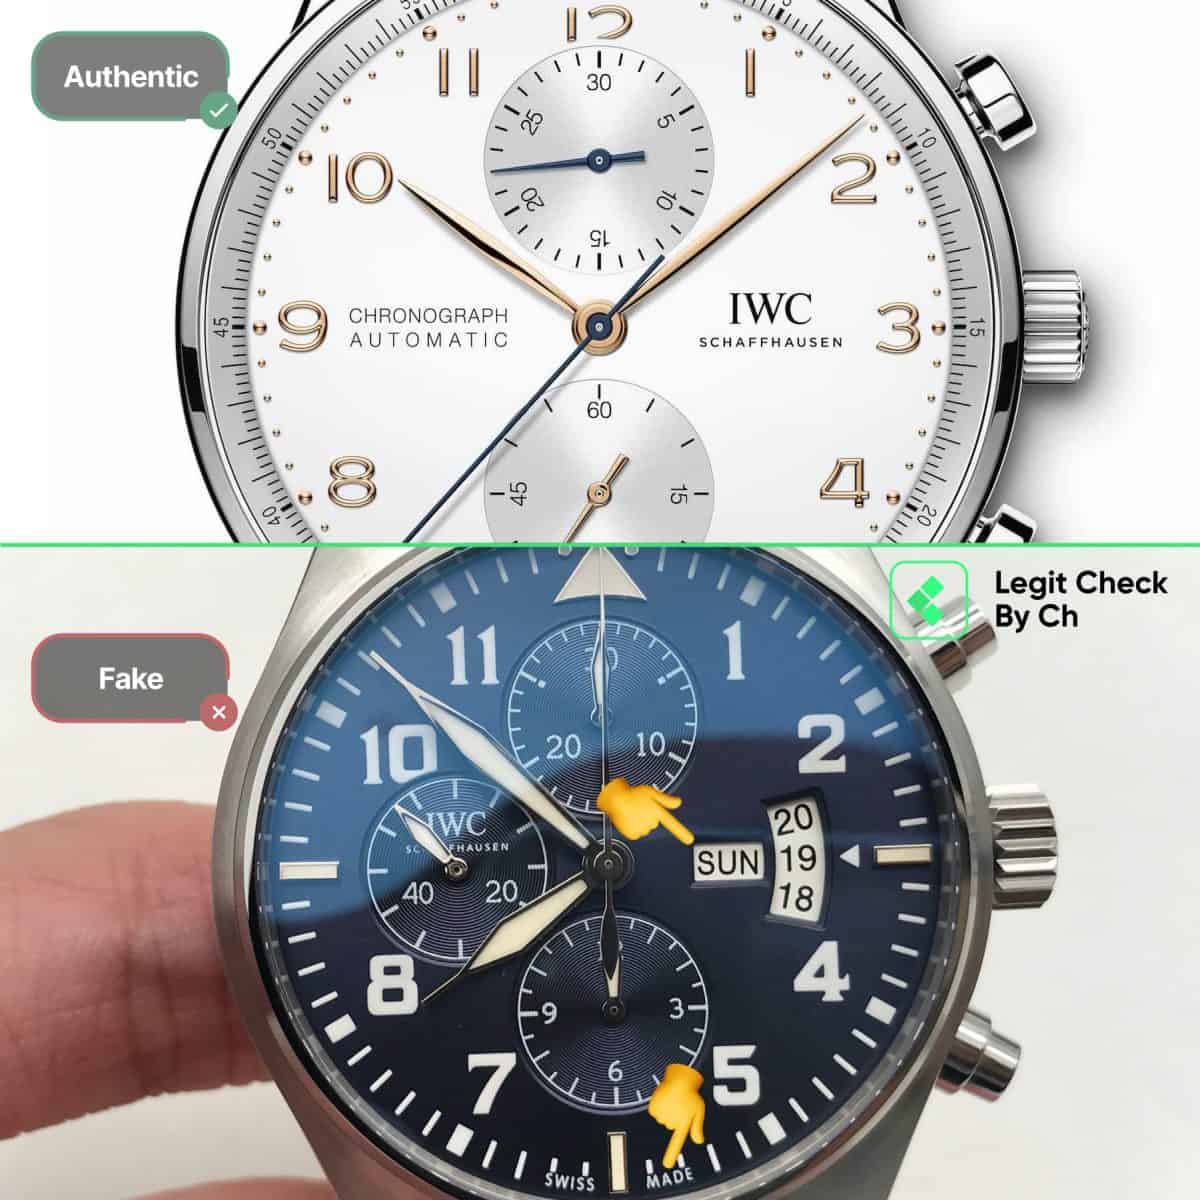 iwc watch authenticity check guide